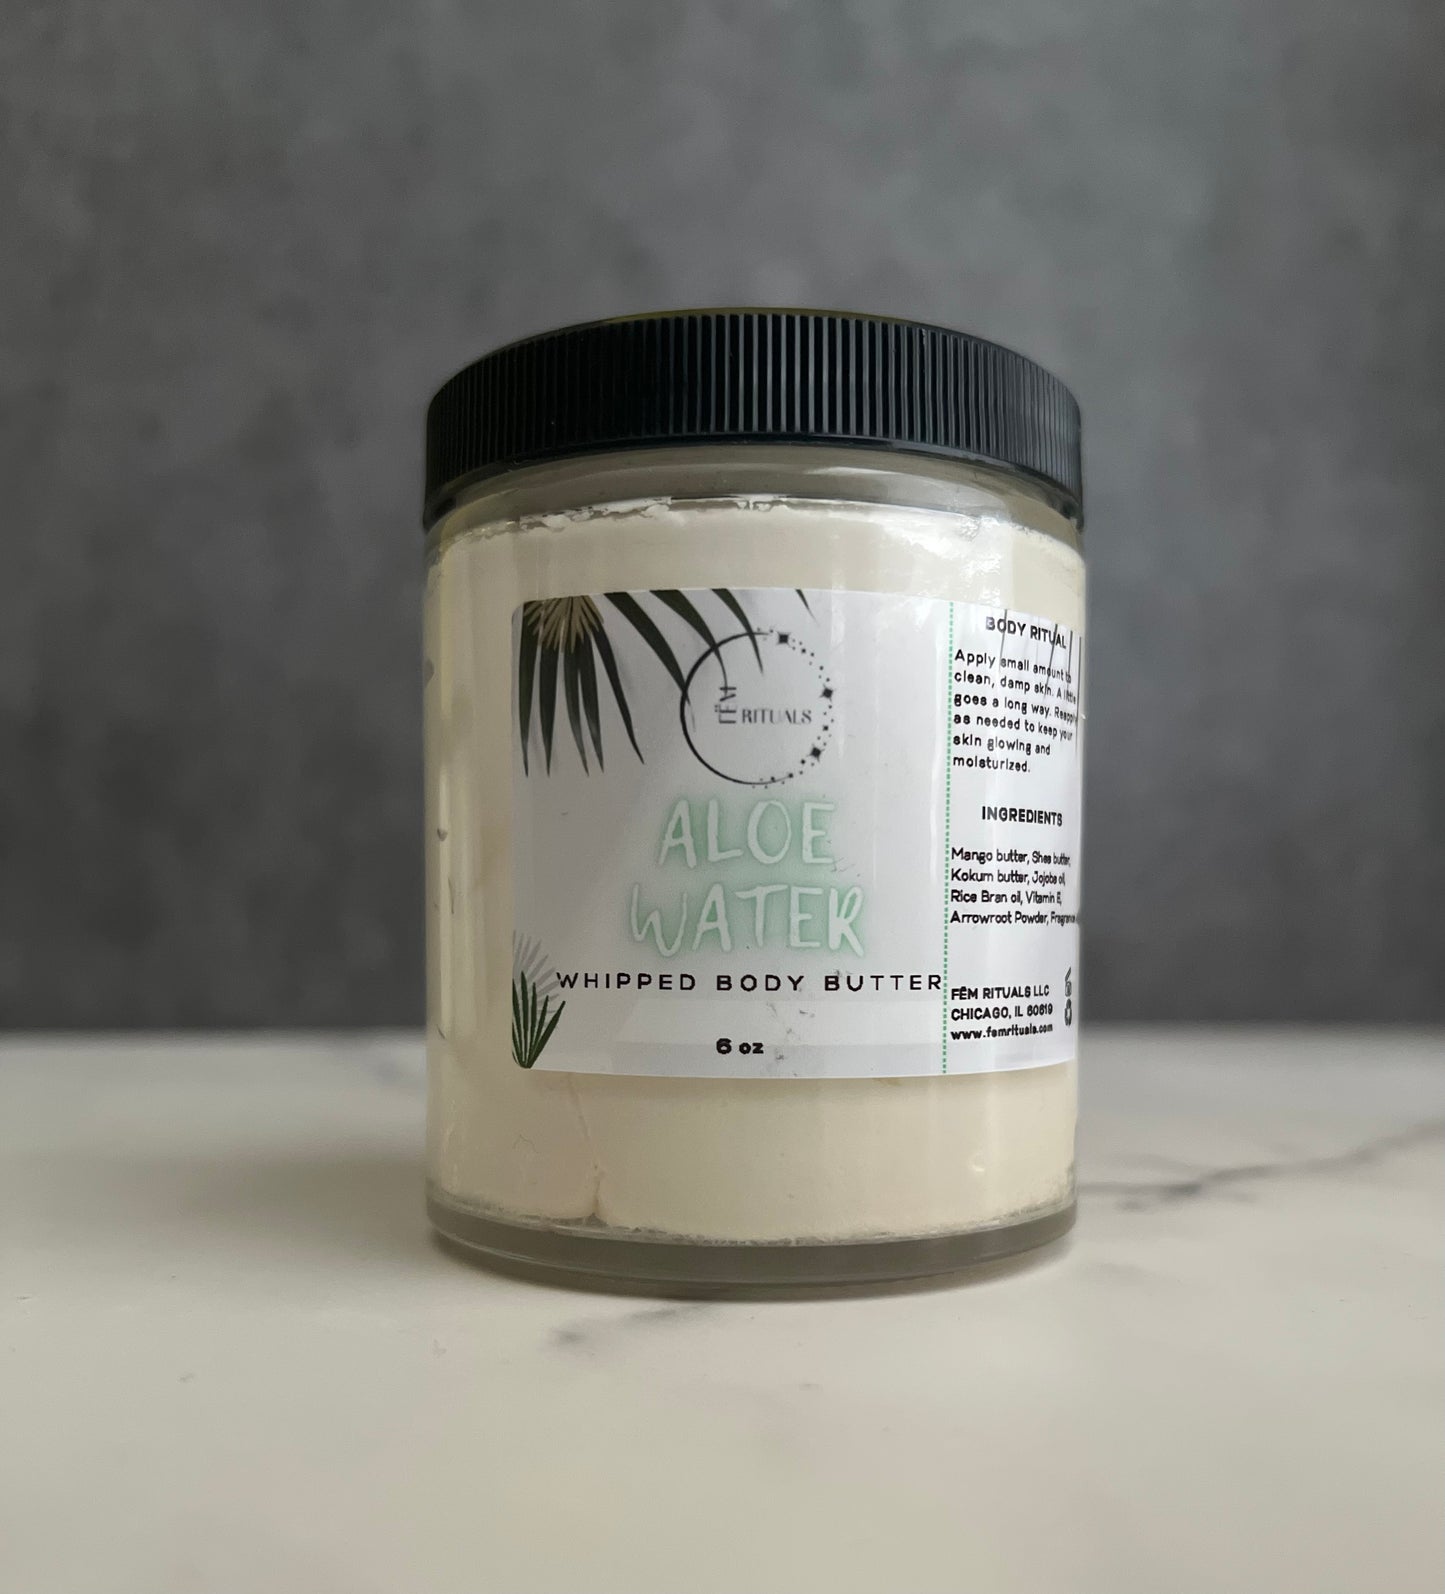 Aloe Water Whipped Body Butter